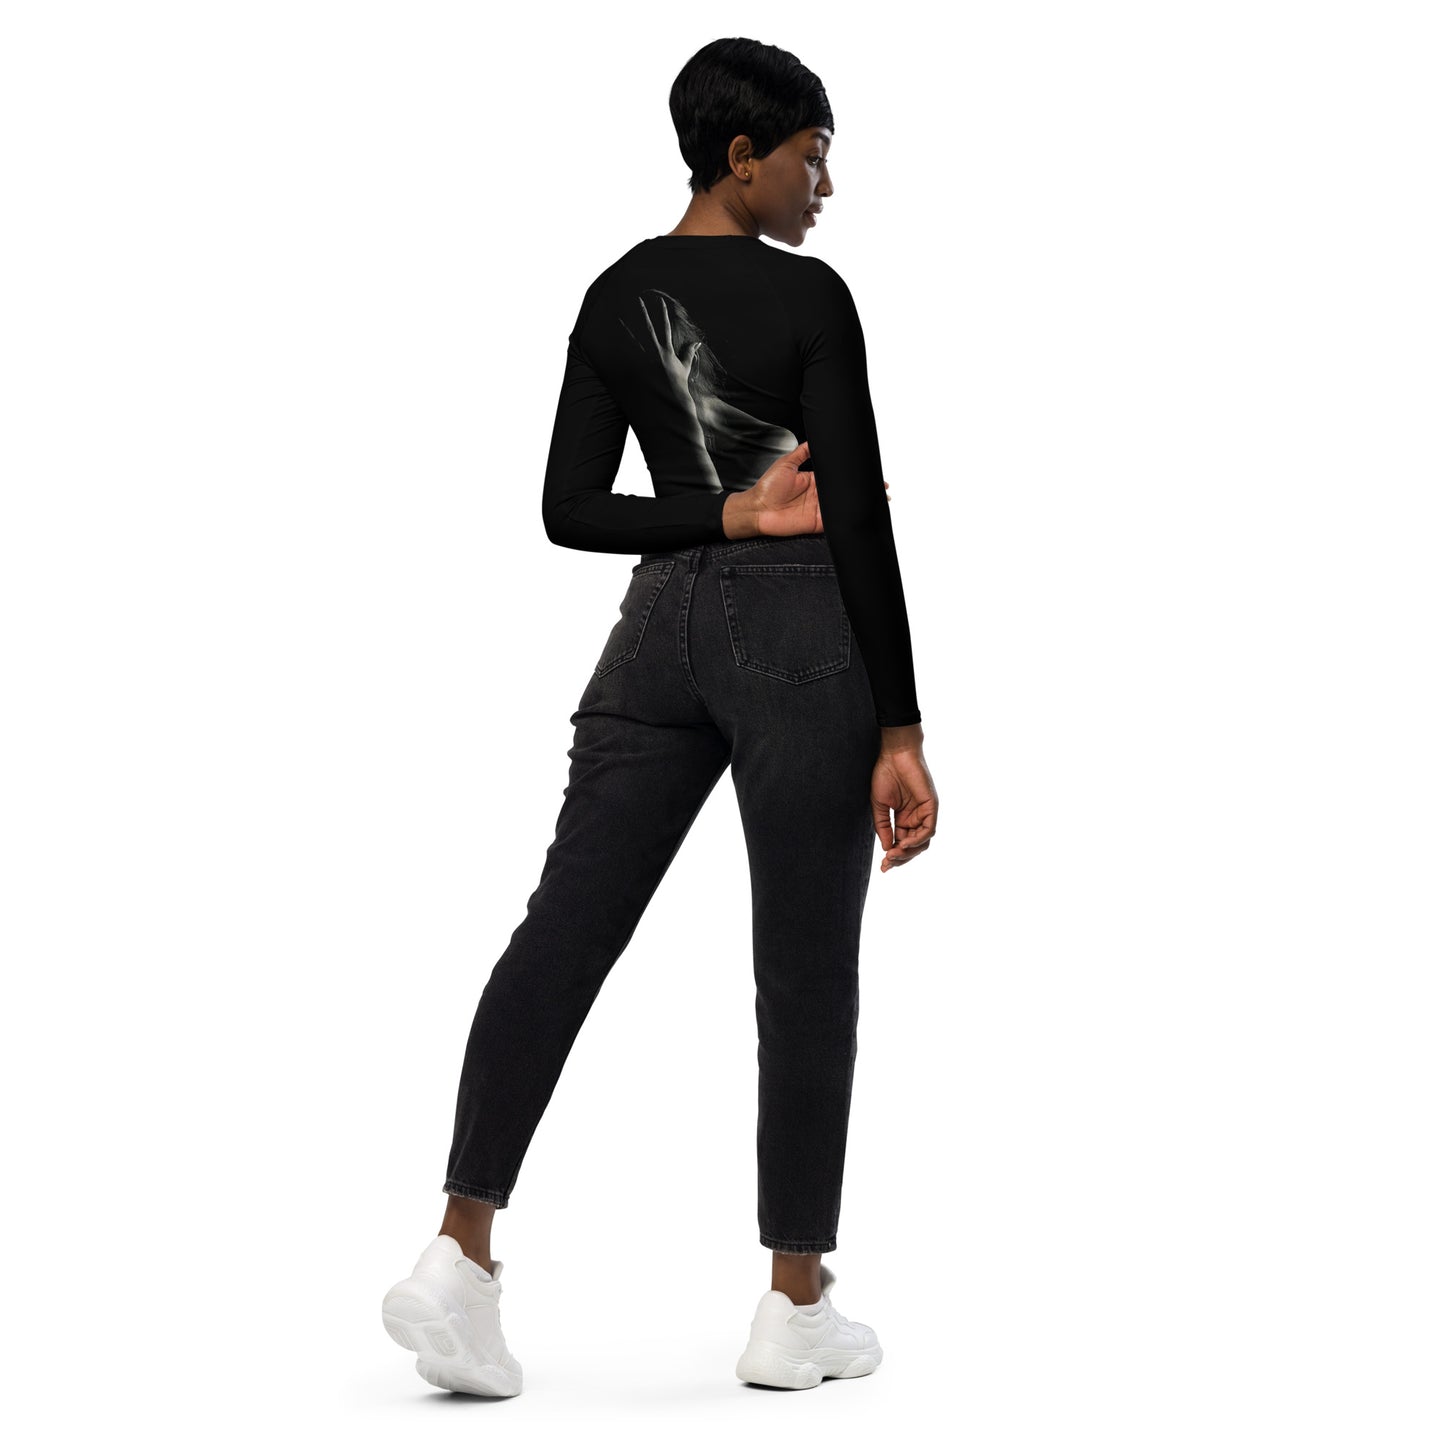 A-Ray of Emotions Long-Sleeve Crop Top